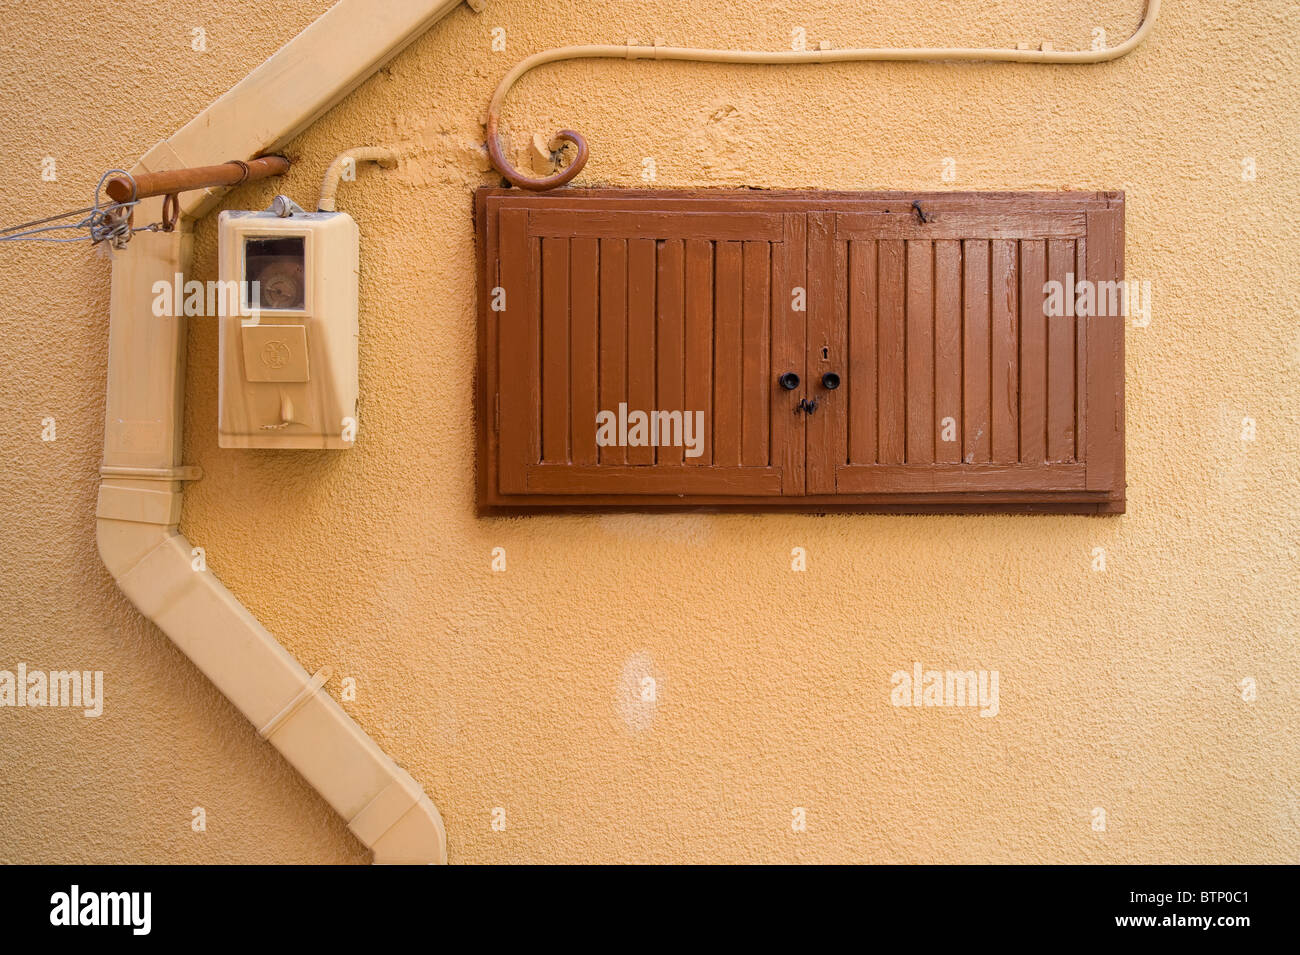 Ocre color adobe wall with electrical meter and closet with brown wooden shutters, in Ermoupolis, on the Greek island of Syros. Stock Photo